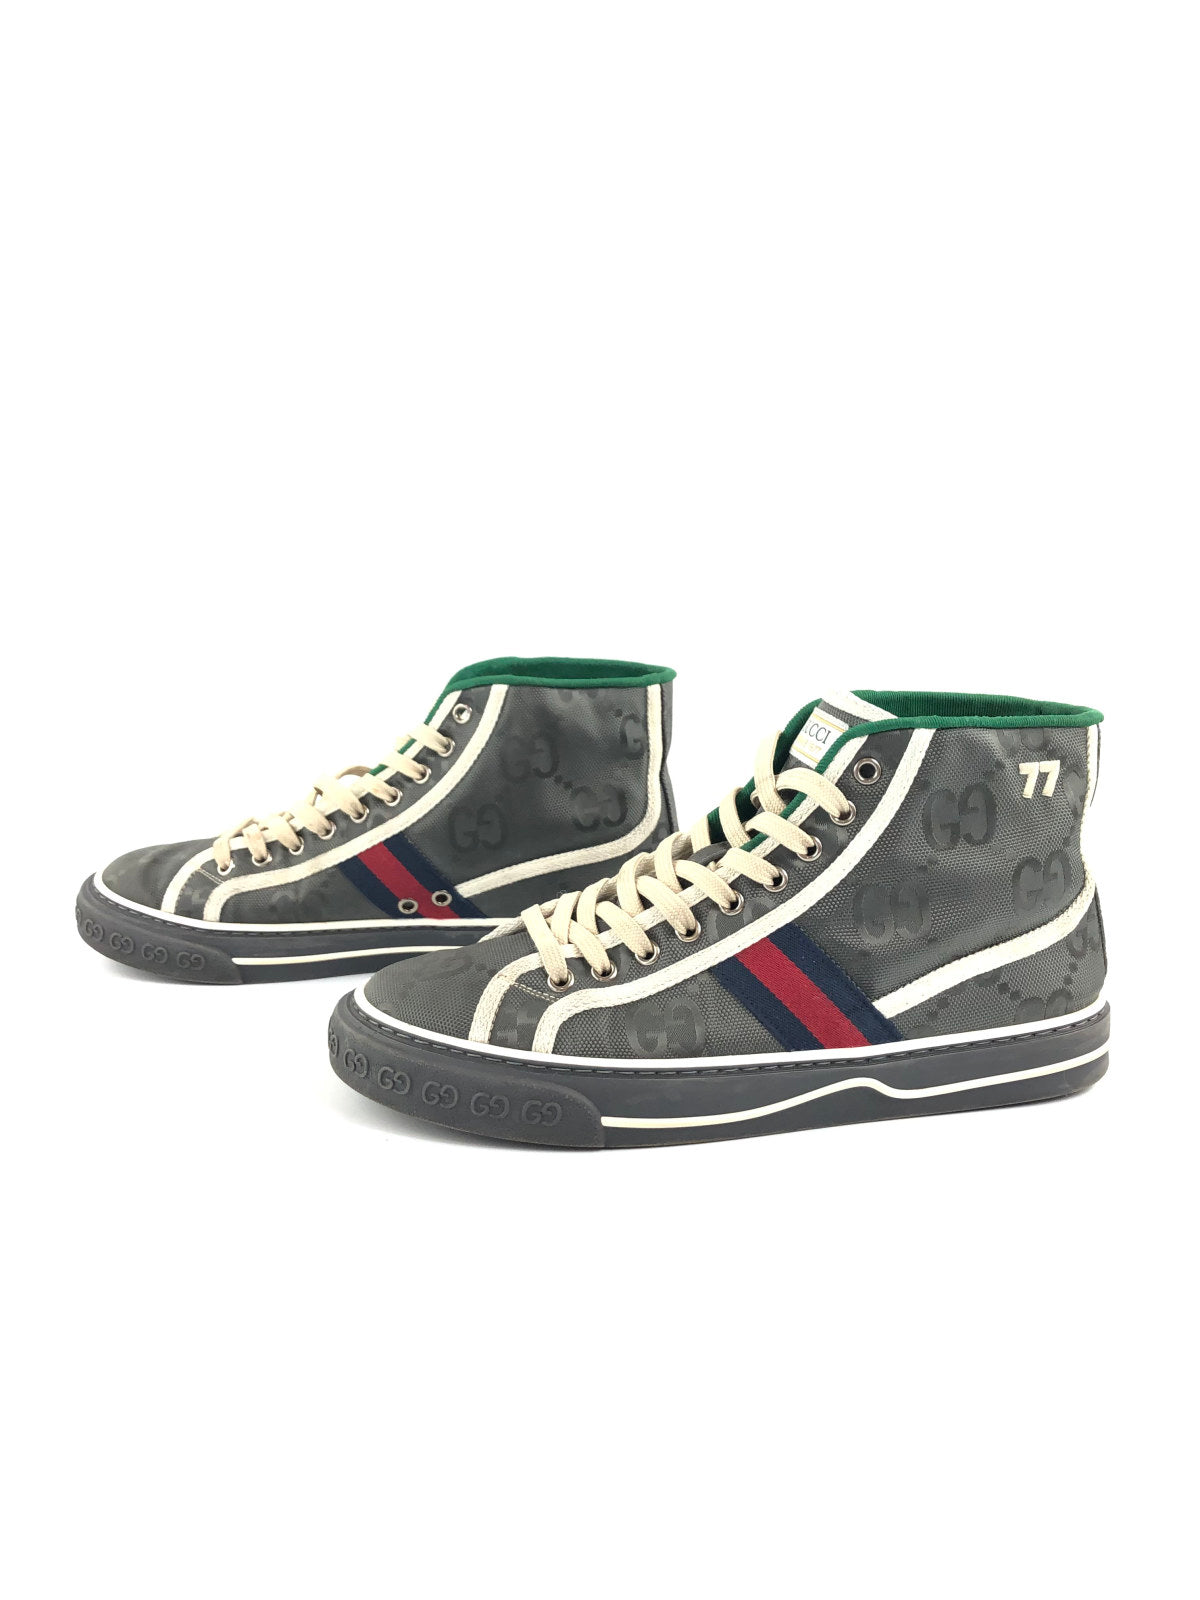 Men's Gucci Tennis 1977 high top sneaker in beige and ebony GG canvas